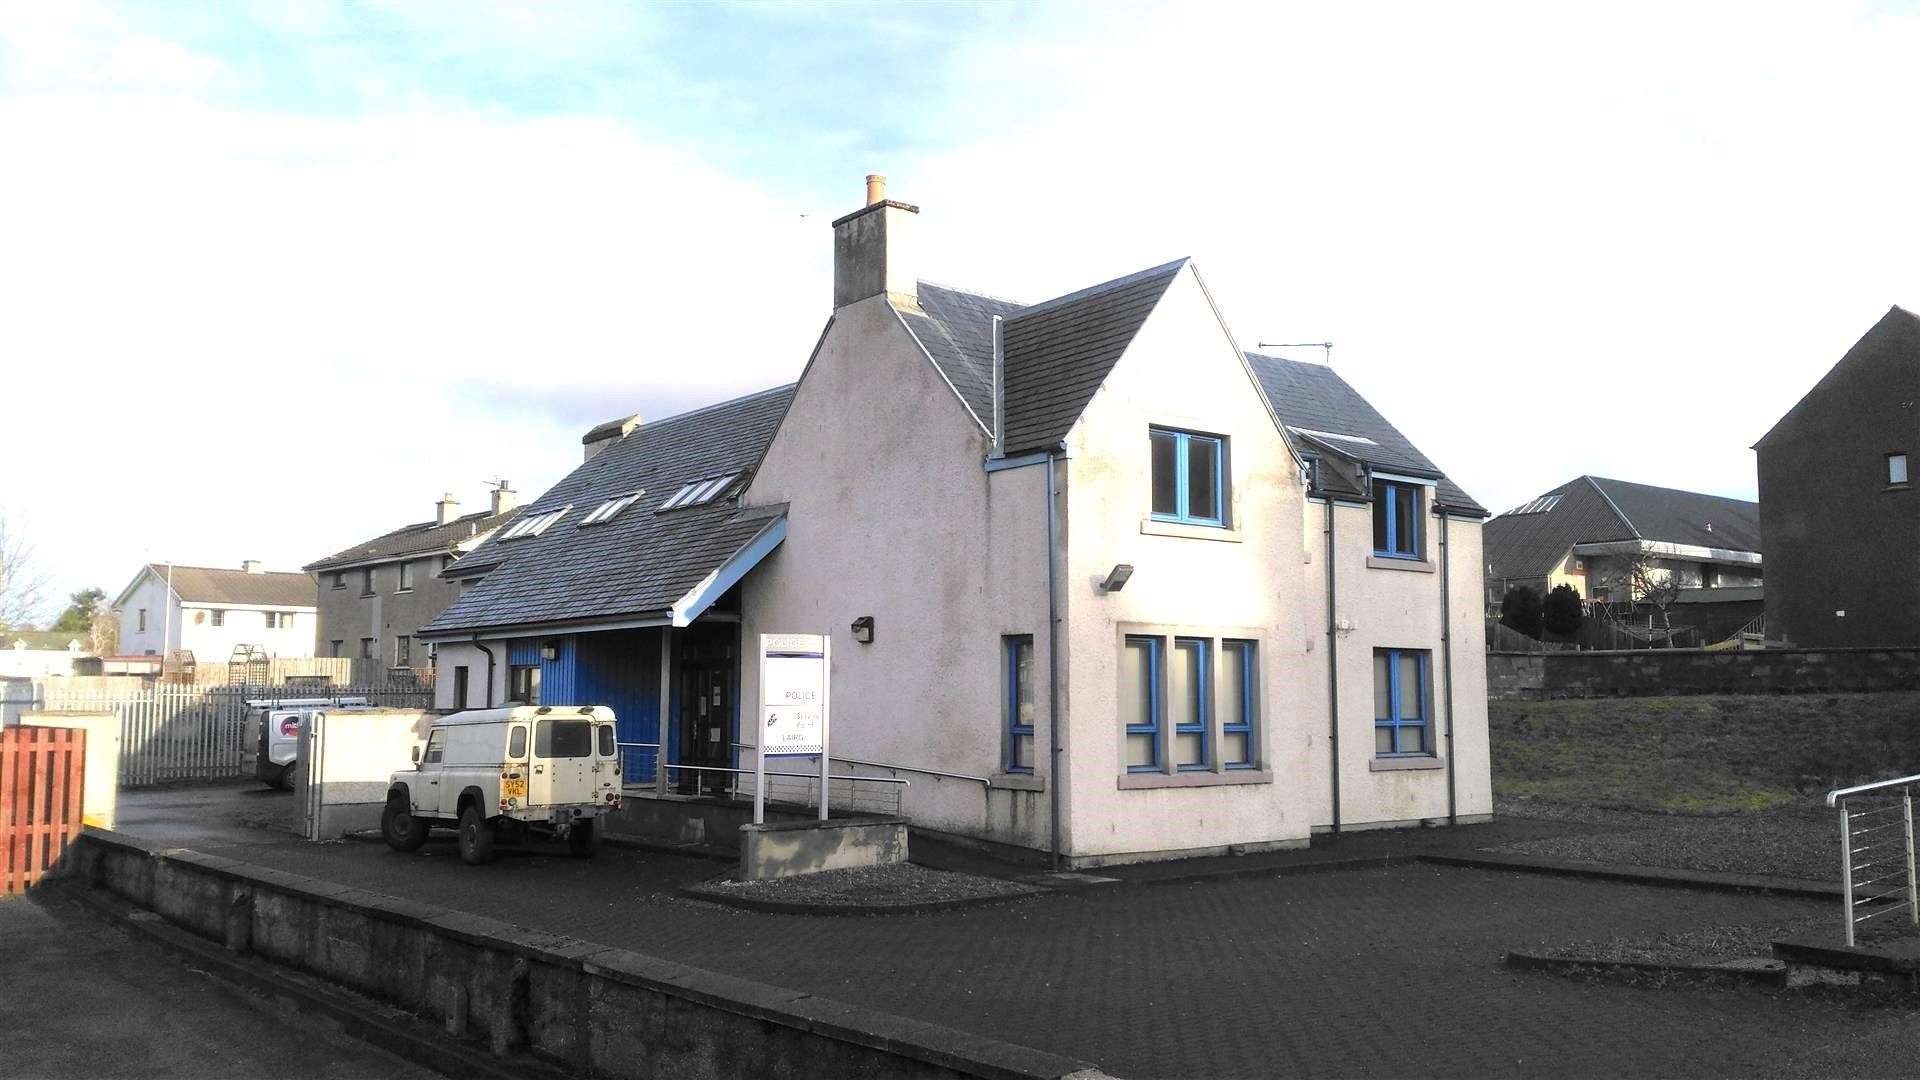 The former police station at Lairg.